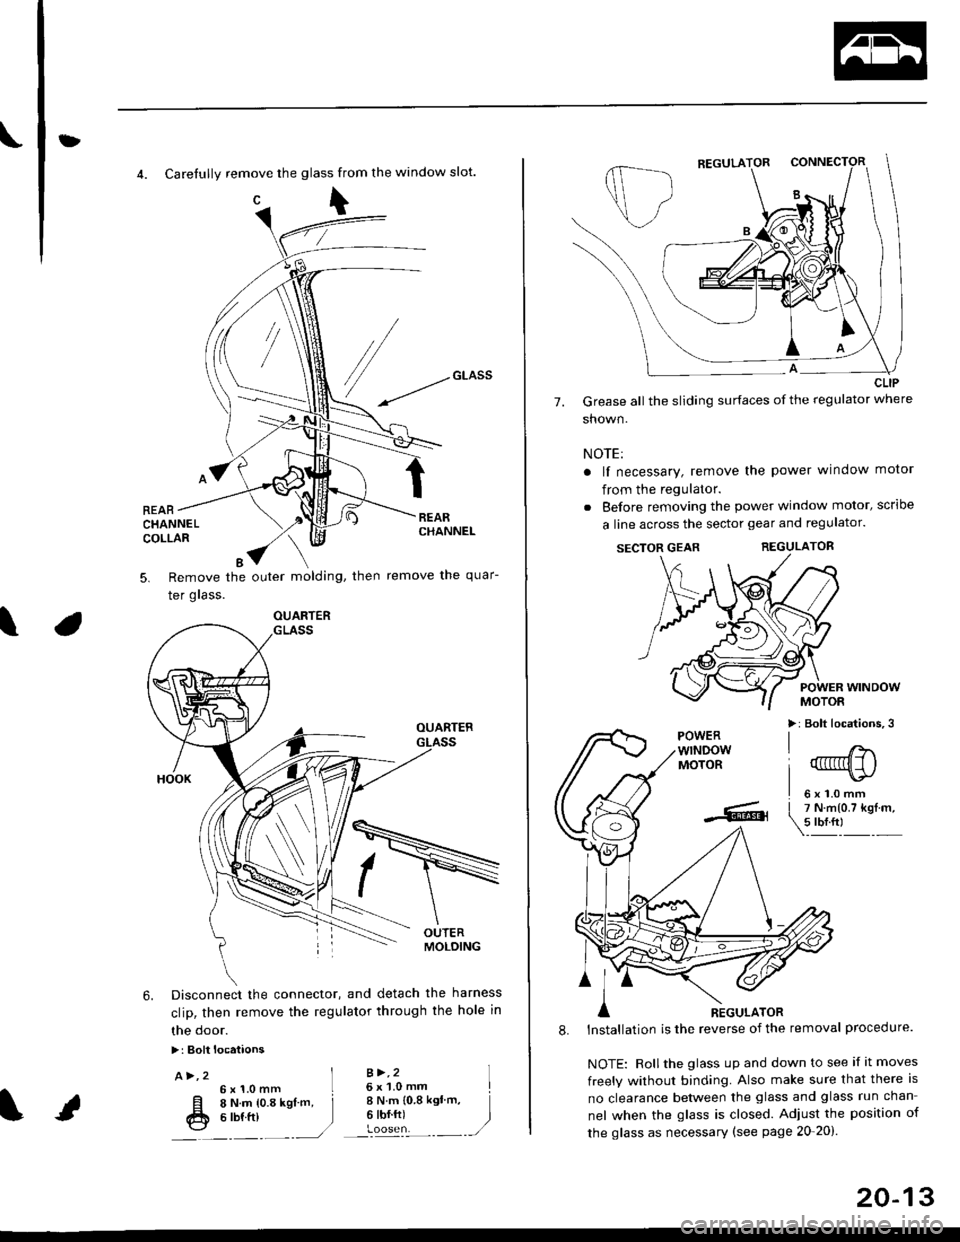 HONDA CIVIC 2000 6.G Workshop Manual t}
4. Carefully remove the glass from the window slot.
c\
REARCHANNELCOLLAR
Remove the outer molding, then
Ier grass.
remove the quar-5.
\
6. Disconnect the connector, and detach the harness
clip, the